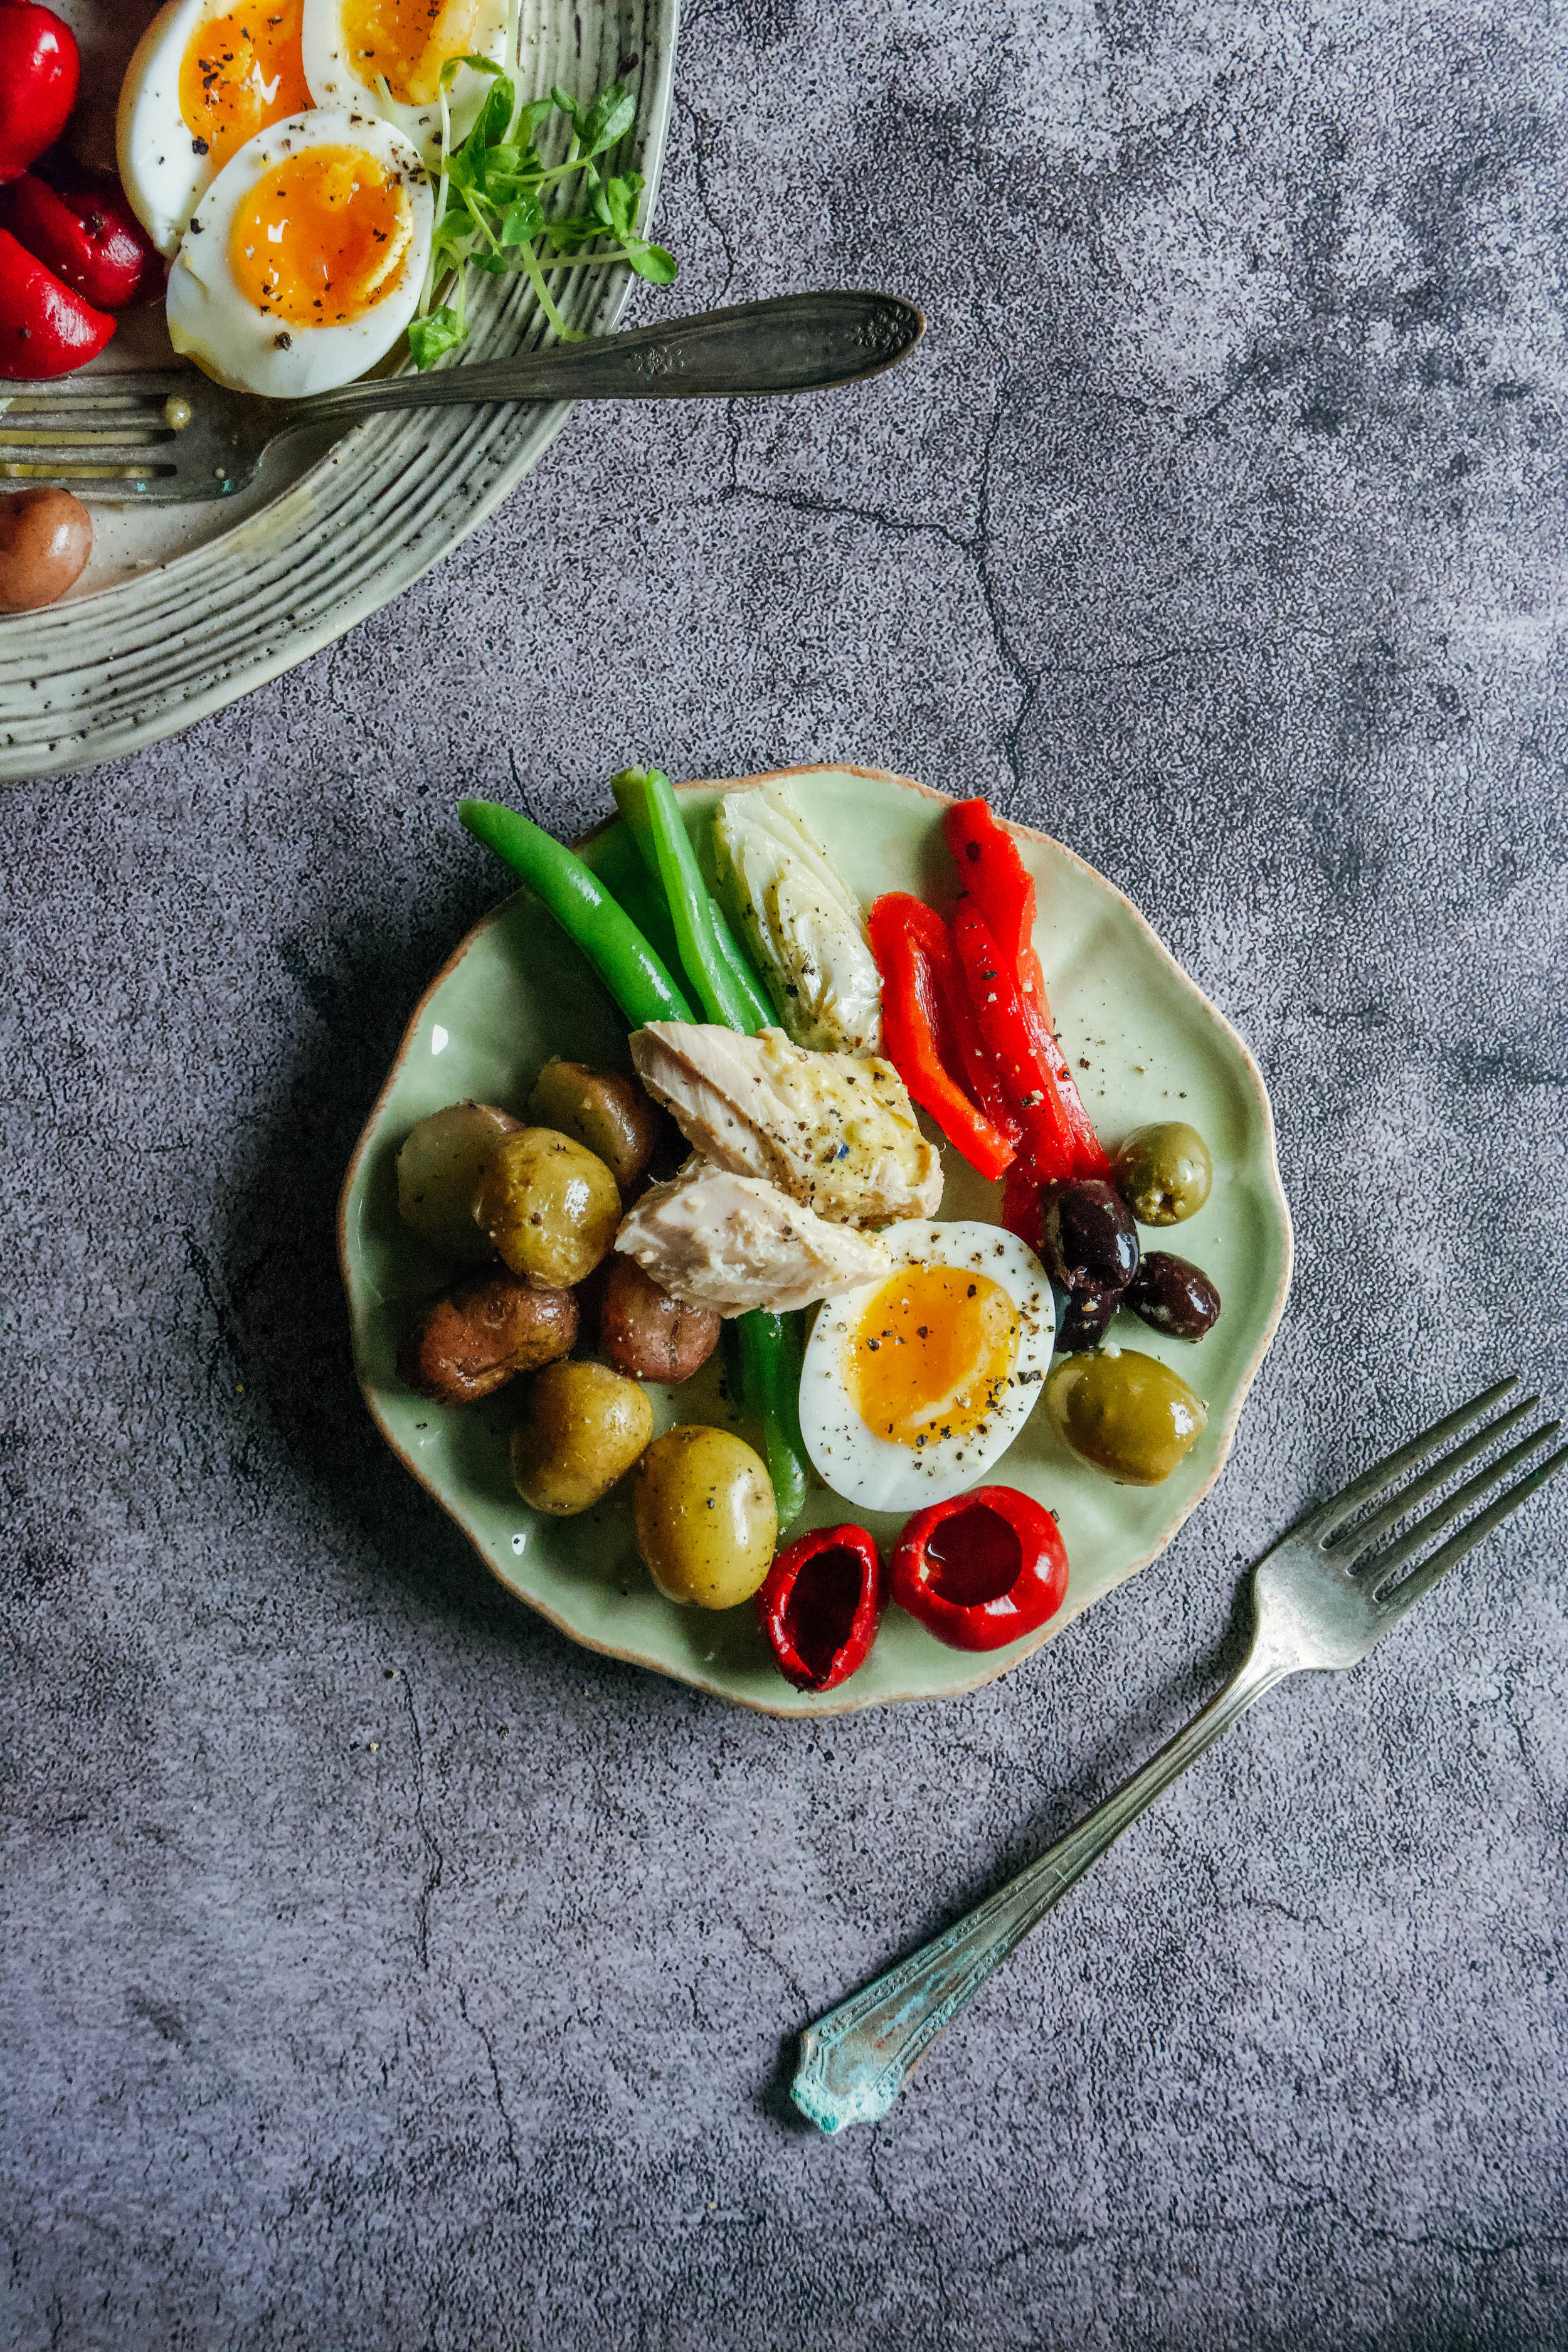  Salad Nicoise may just be the most perfect salad invented. Tasty St Jude Tuna works beautifully with, crunch green beans, creamy potatoes, soft boiled eggs, briny vegetables and tangy dressing. It’s one recipe that’s on repeat in my house. #saladnicoise #nicoisesalad #tunanicoisesalad #tunanicoise #calmeats #salad #pleosalad #whole30salad #whole30 #paleo #glutenfree #dairyfree #realfood #stjudetuna 